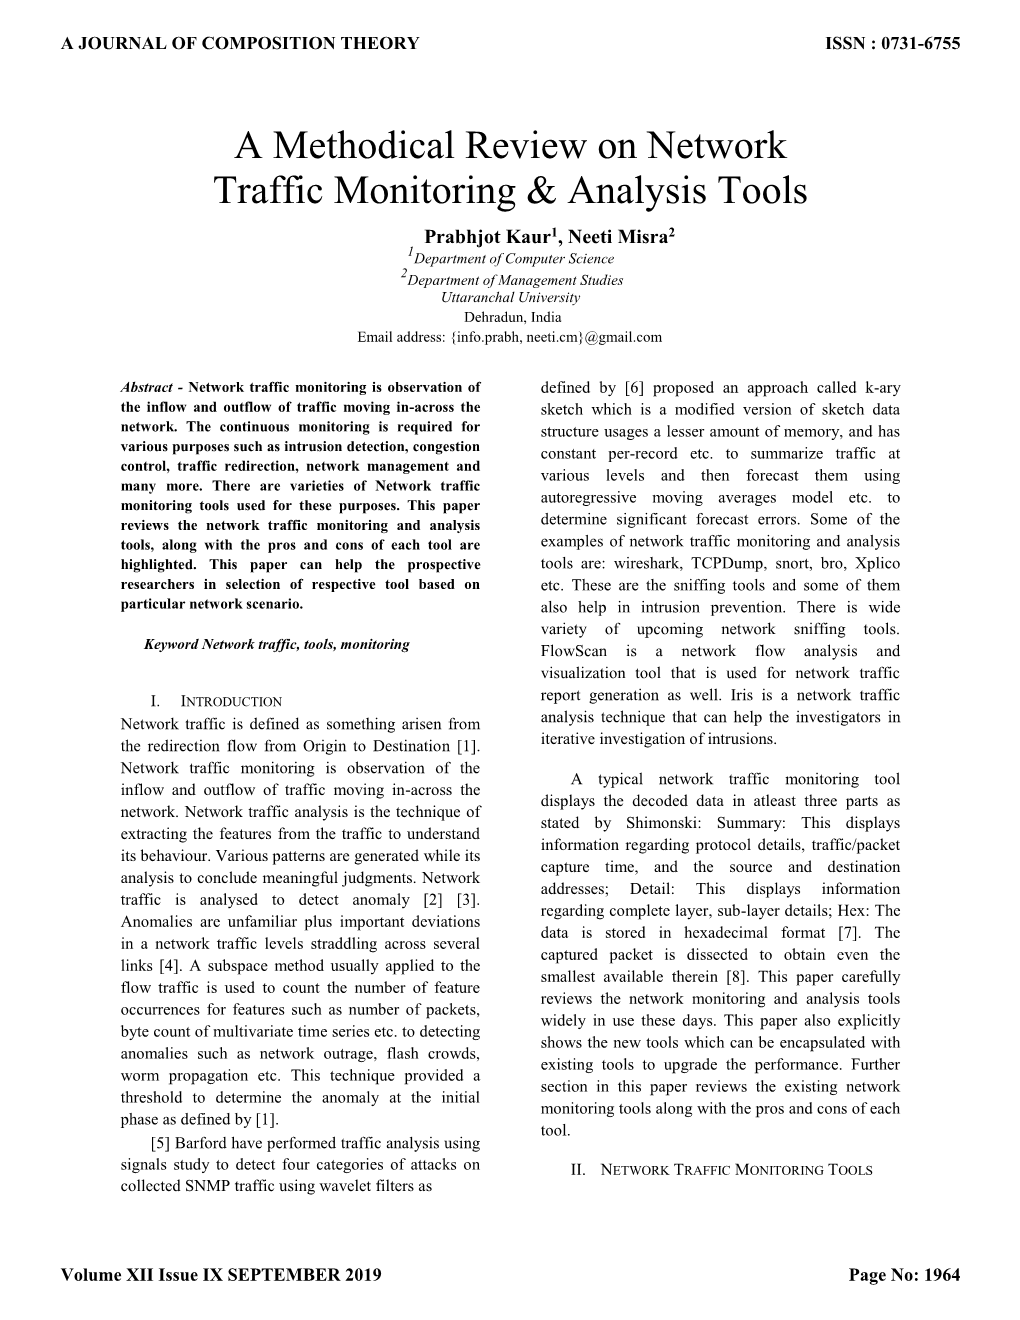 A Methodical Review on Network Traffic Monitoring & Analysis Tools